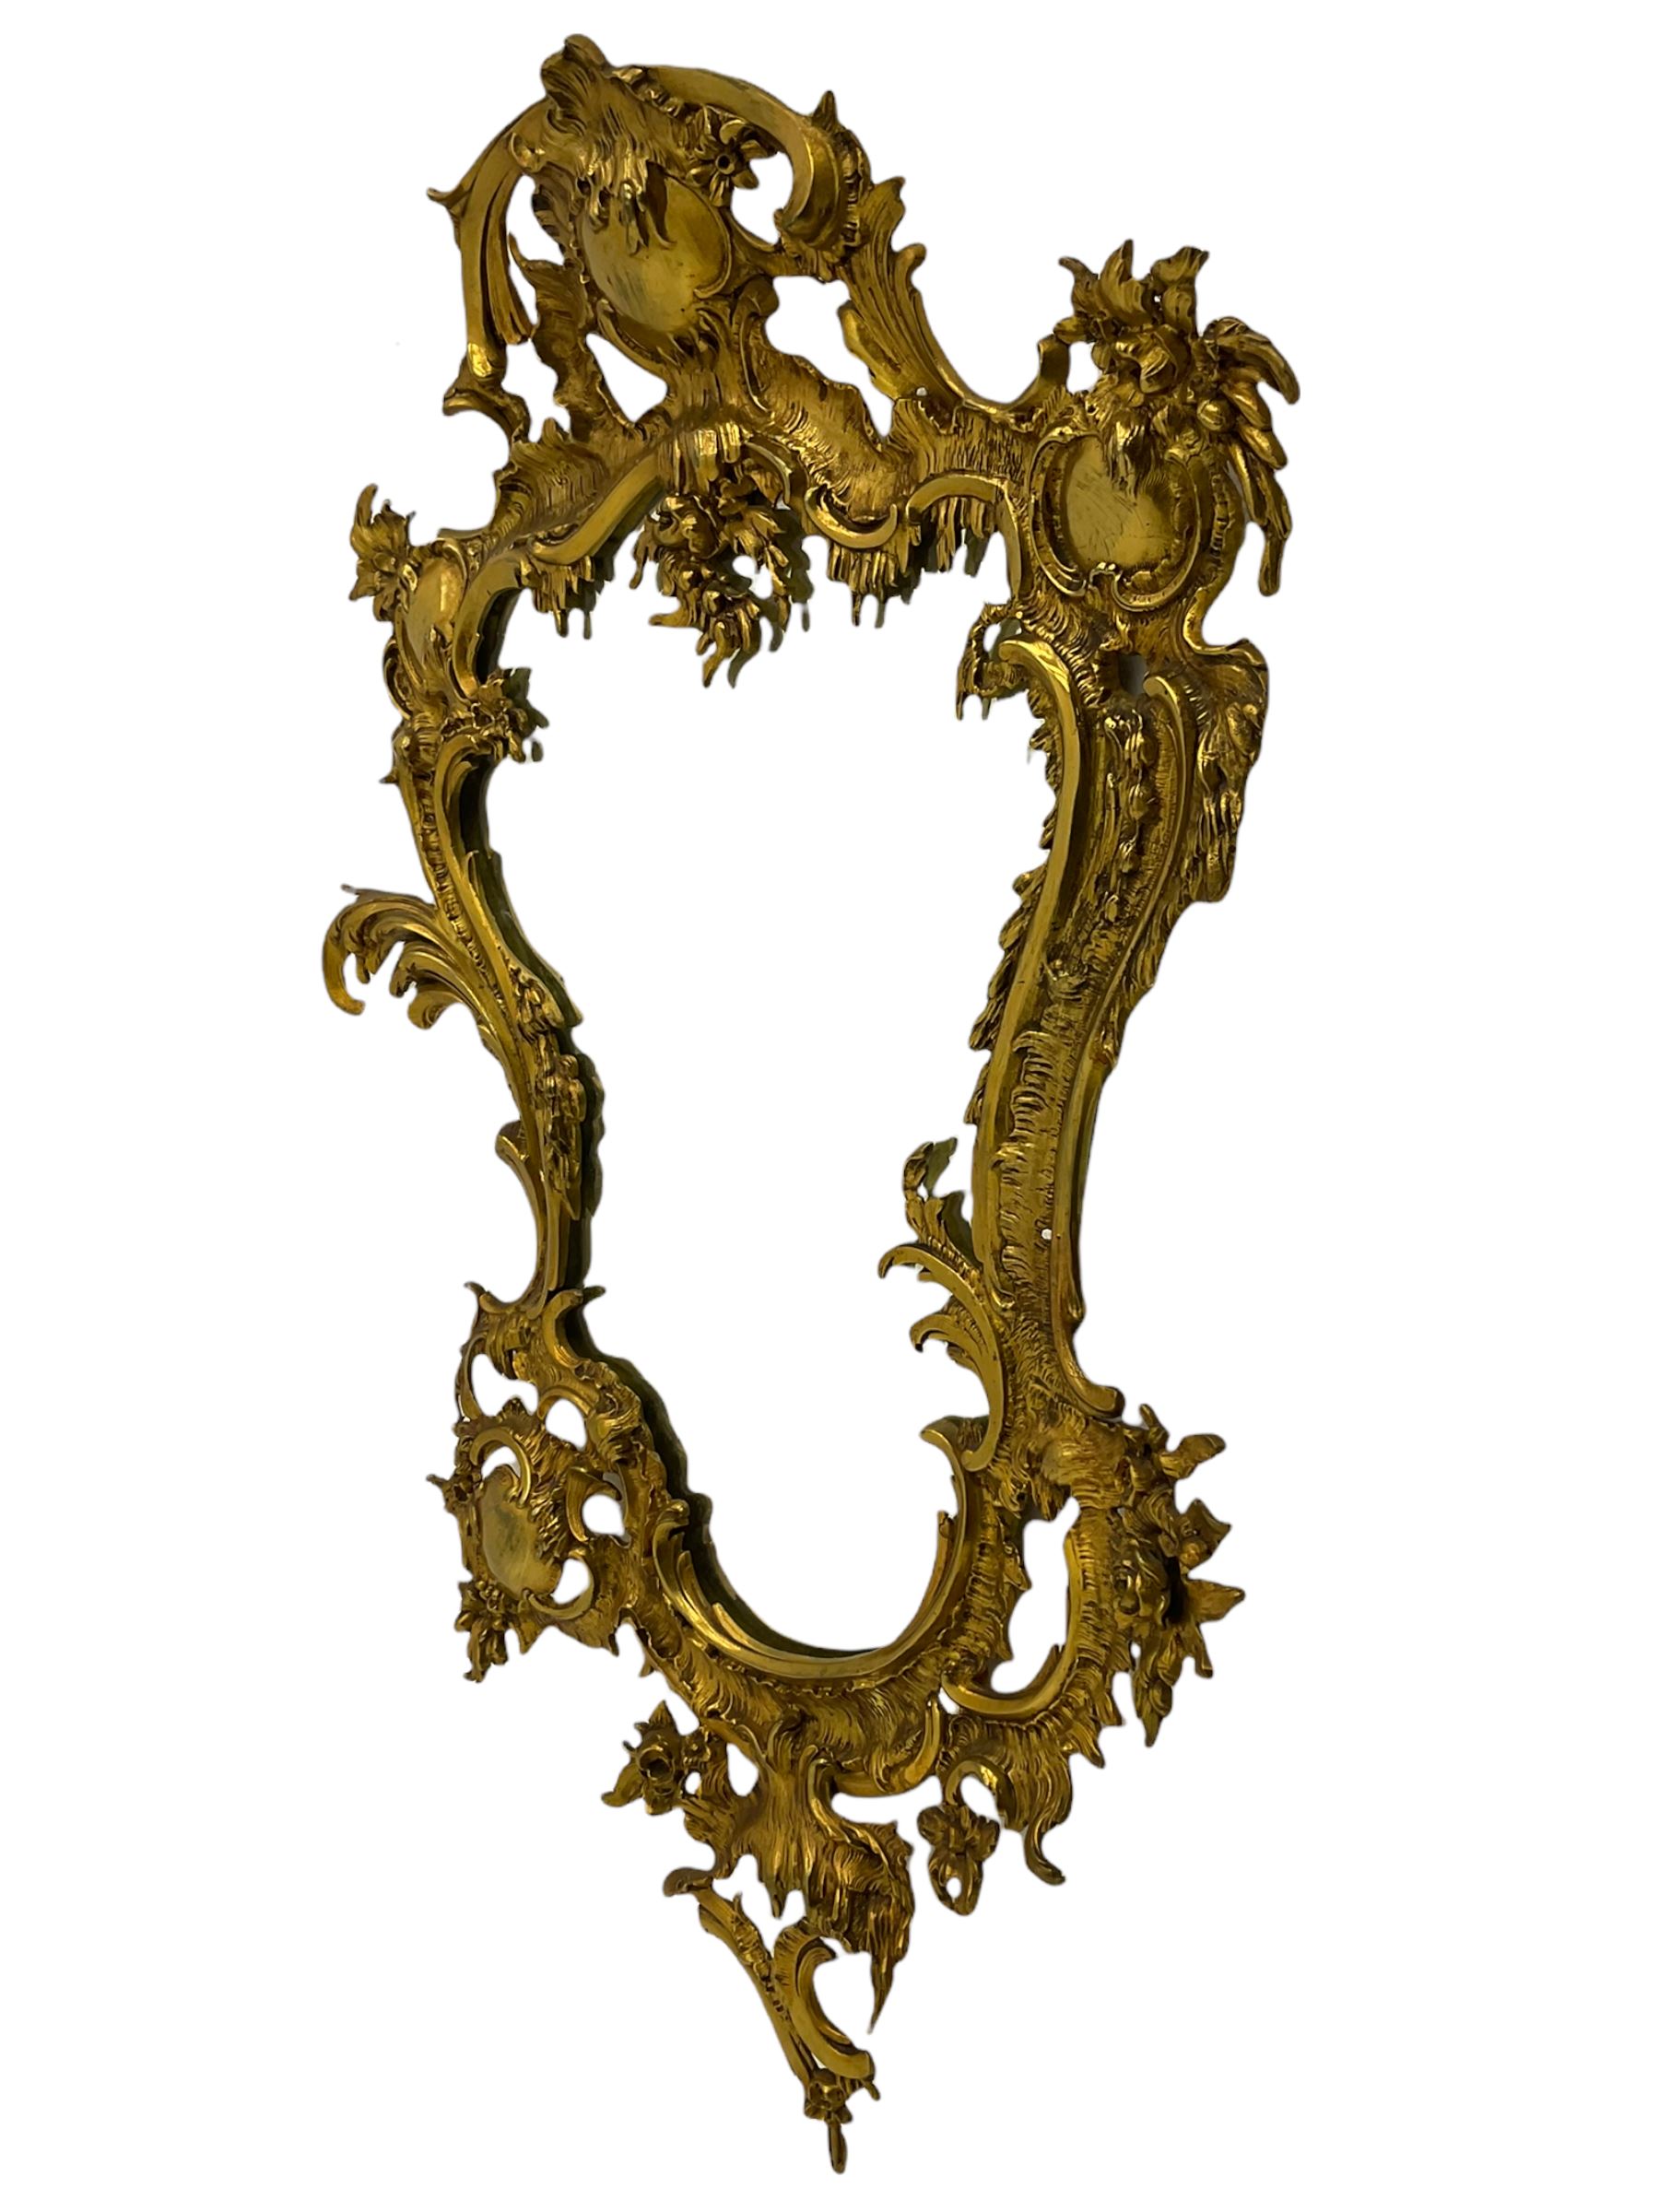 Rococo style ornate cast brass wall mirror - Image 2 of 5